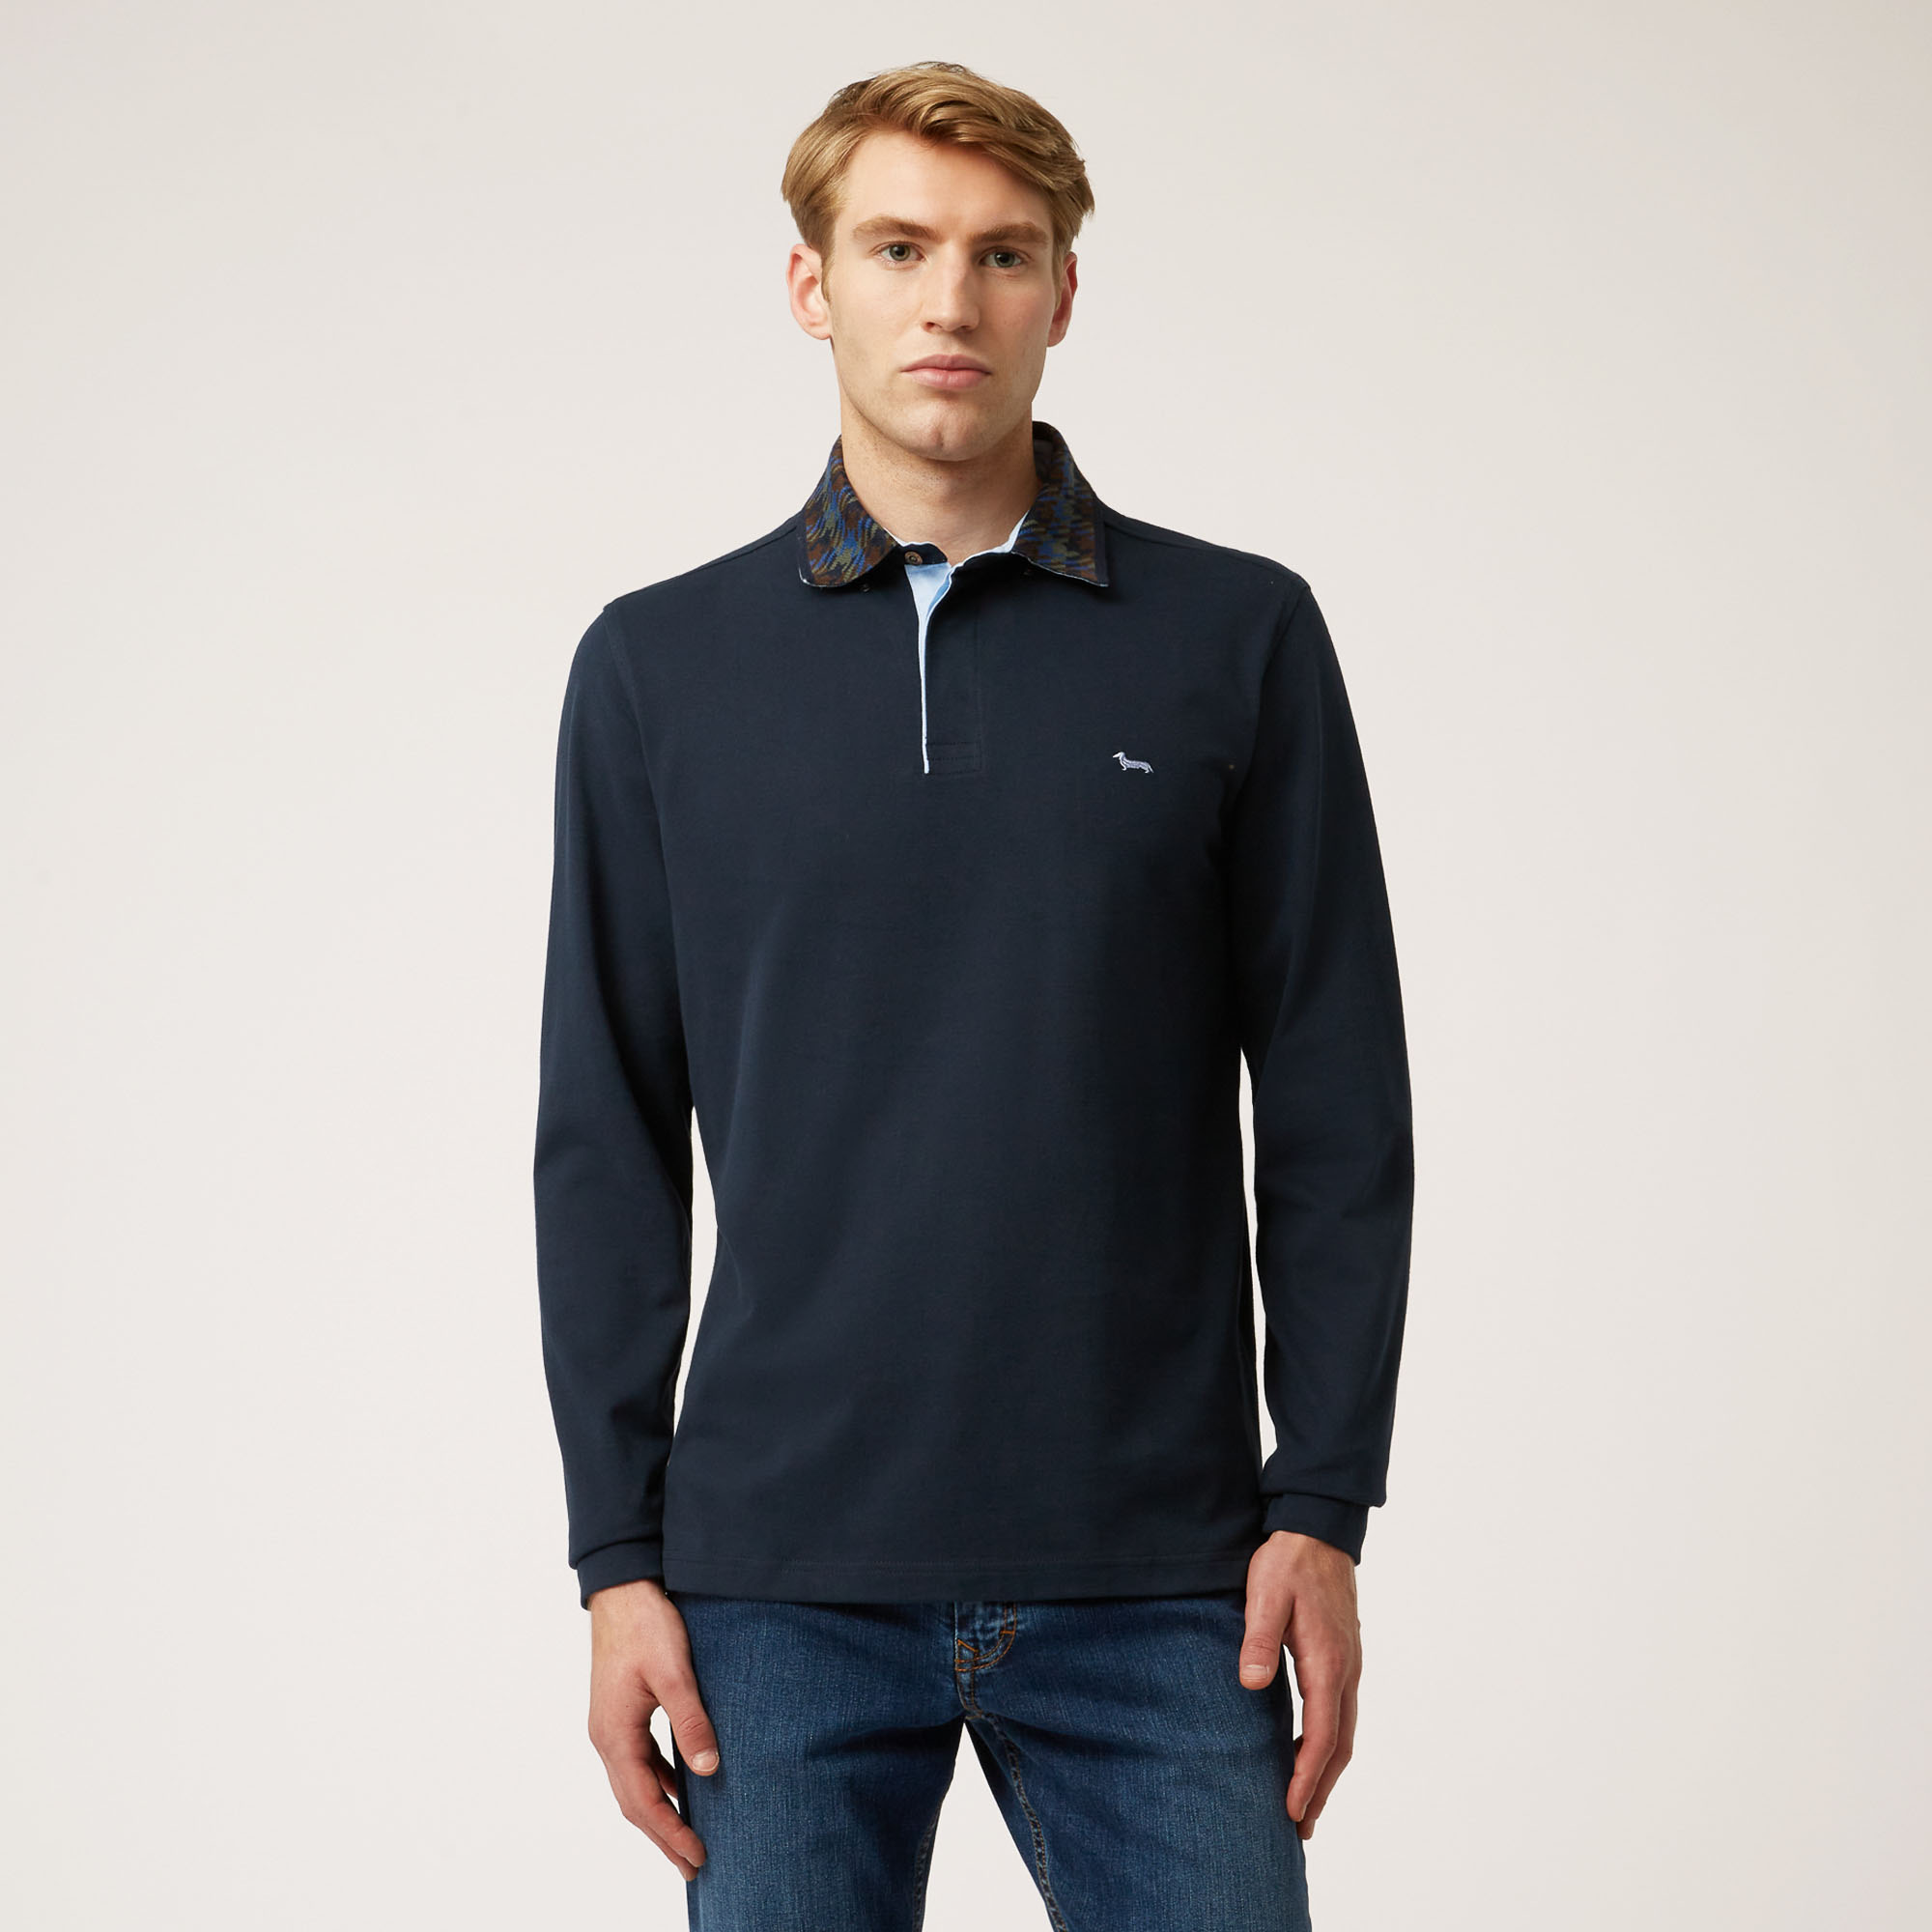 Vietri Long-Sleeved Polo Shirt With Contrasting Collar, Blue, large